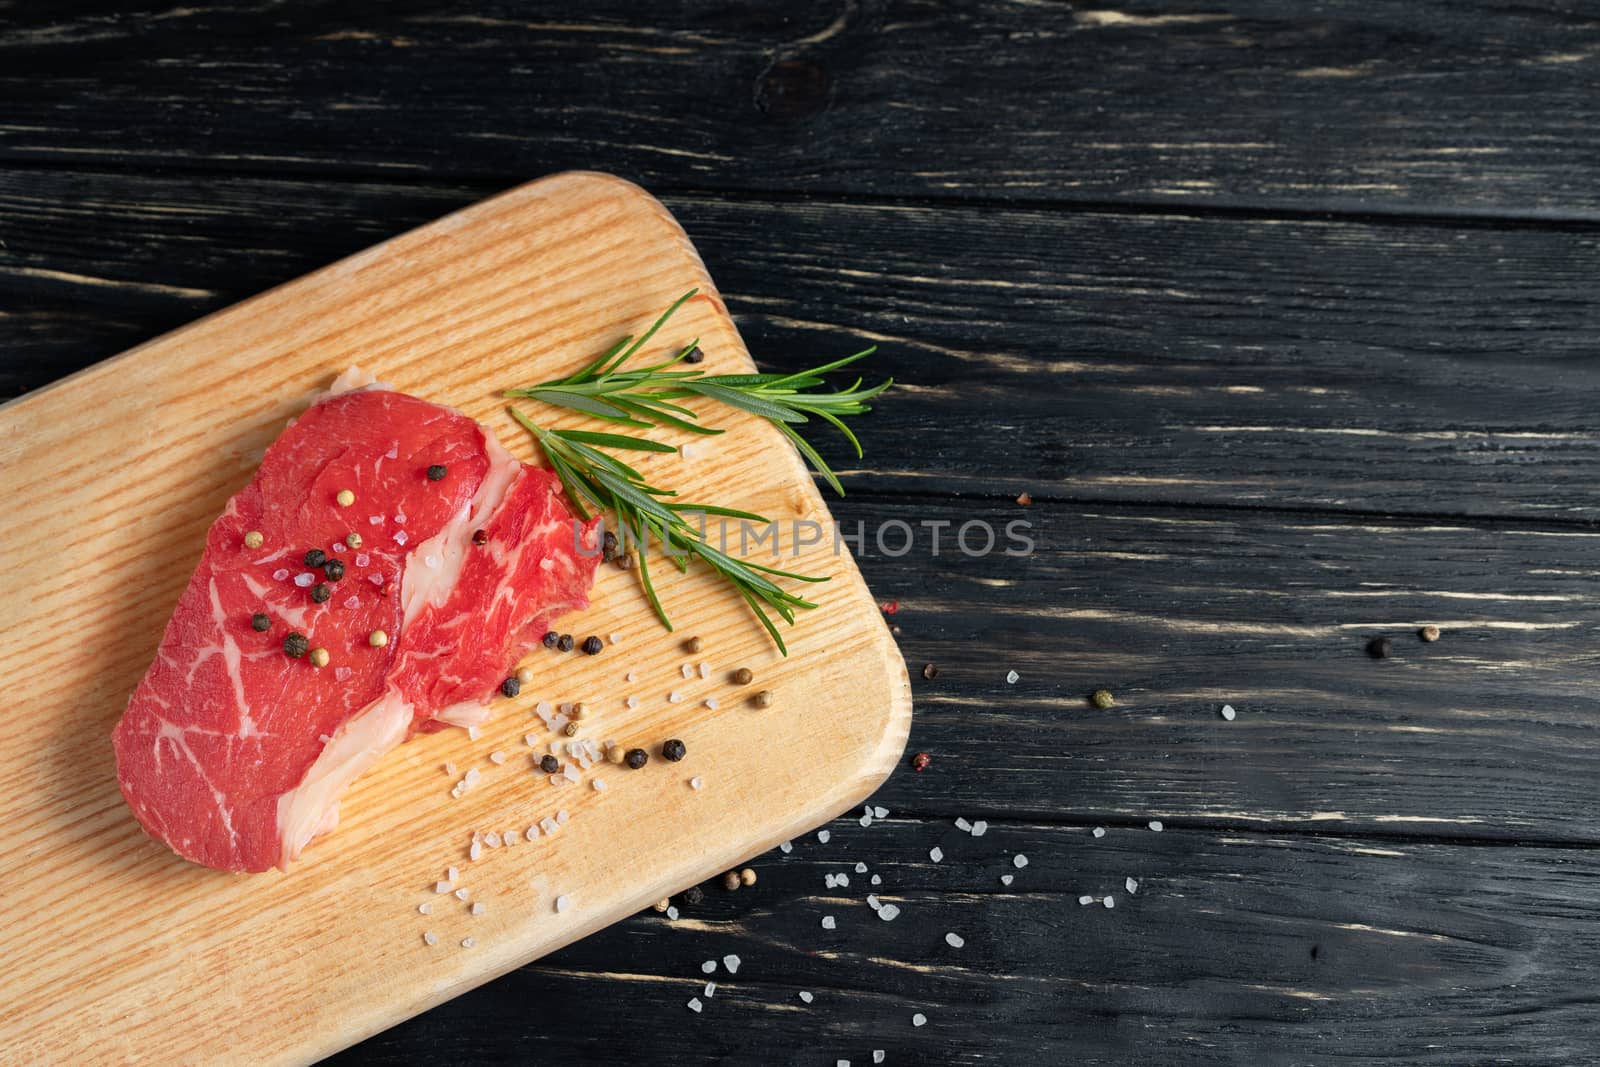 one pieces of juicy raw beef with rosemary on a cutting board on a black wooden table background. Meat for barbecue or grill sprinkled with pepper and salt seasoning